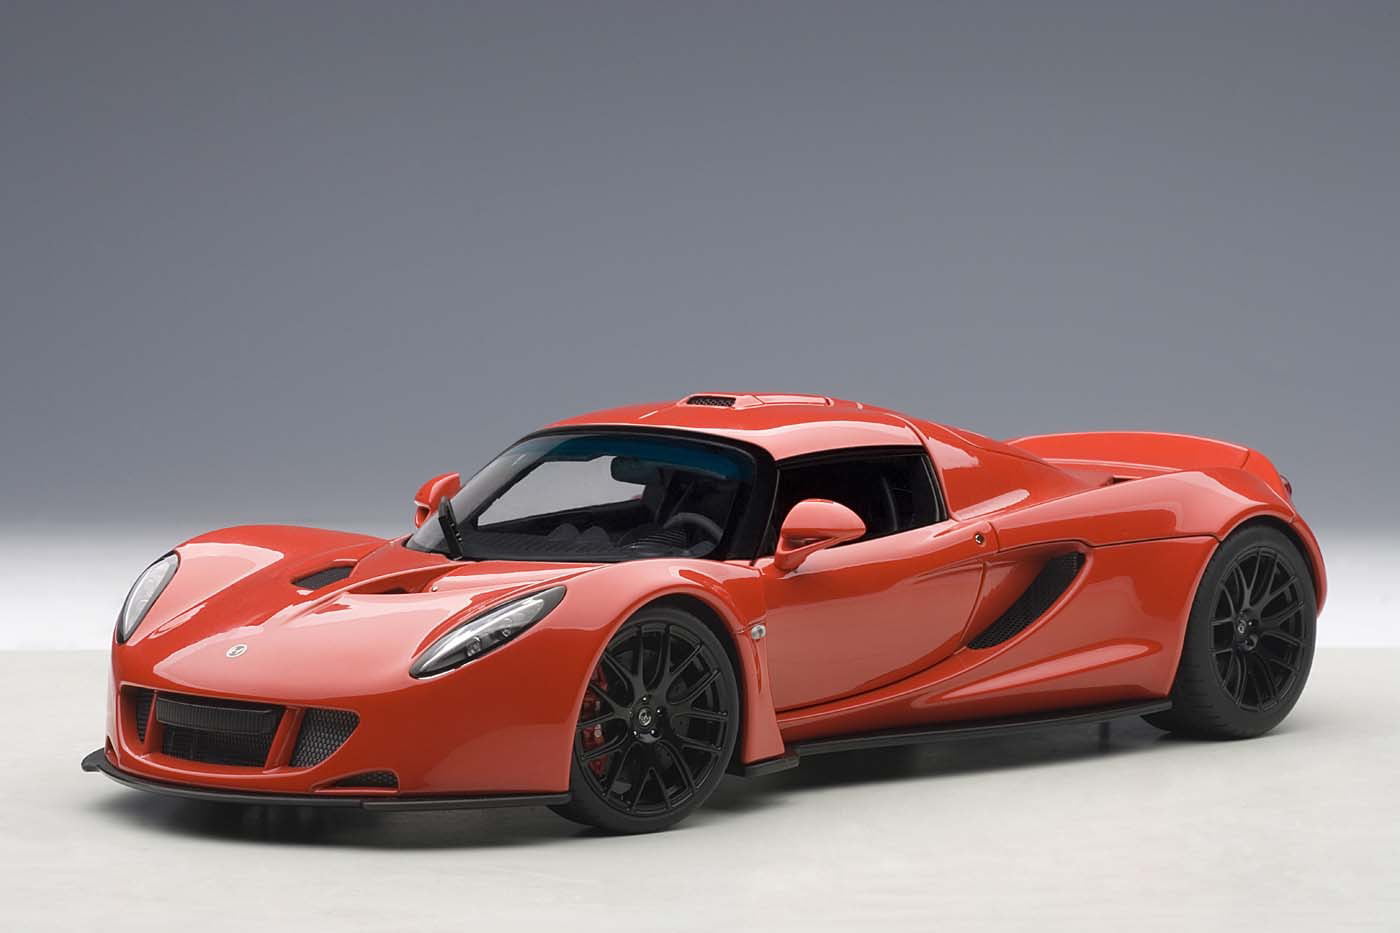 Autoart AA75403 1 to 18 Scale Hennessey Venom GT Red Diecast Model